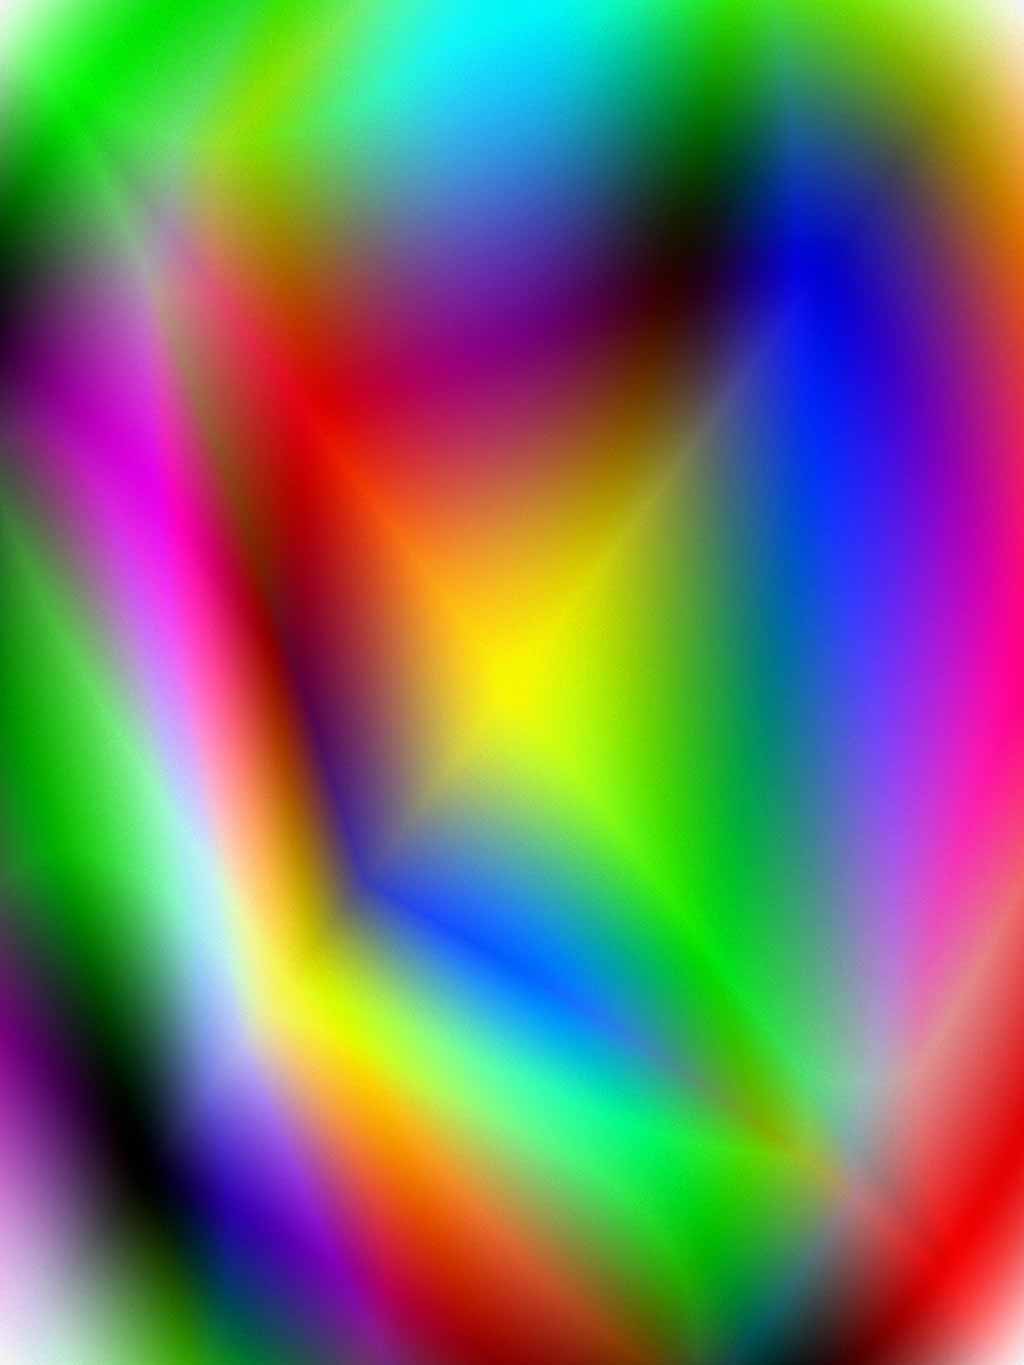 Crystalline runs of pure strong colors; laser computer graphic by Wiesław Sadurski